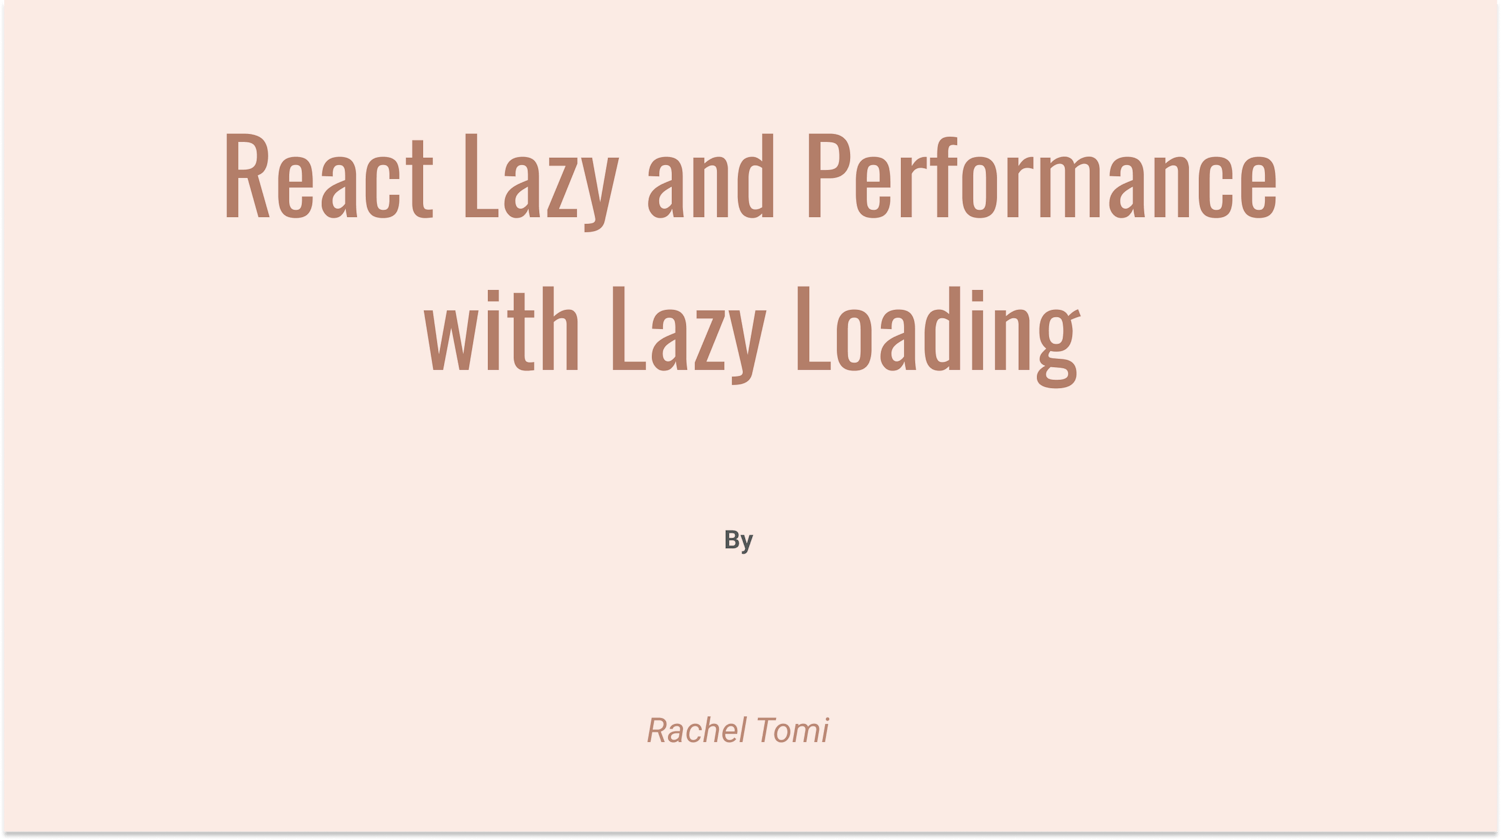 Boost Your App Performance with React Lazy and Suspense